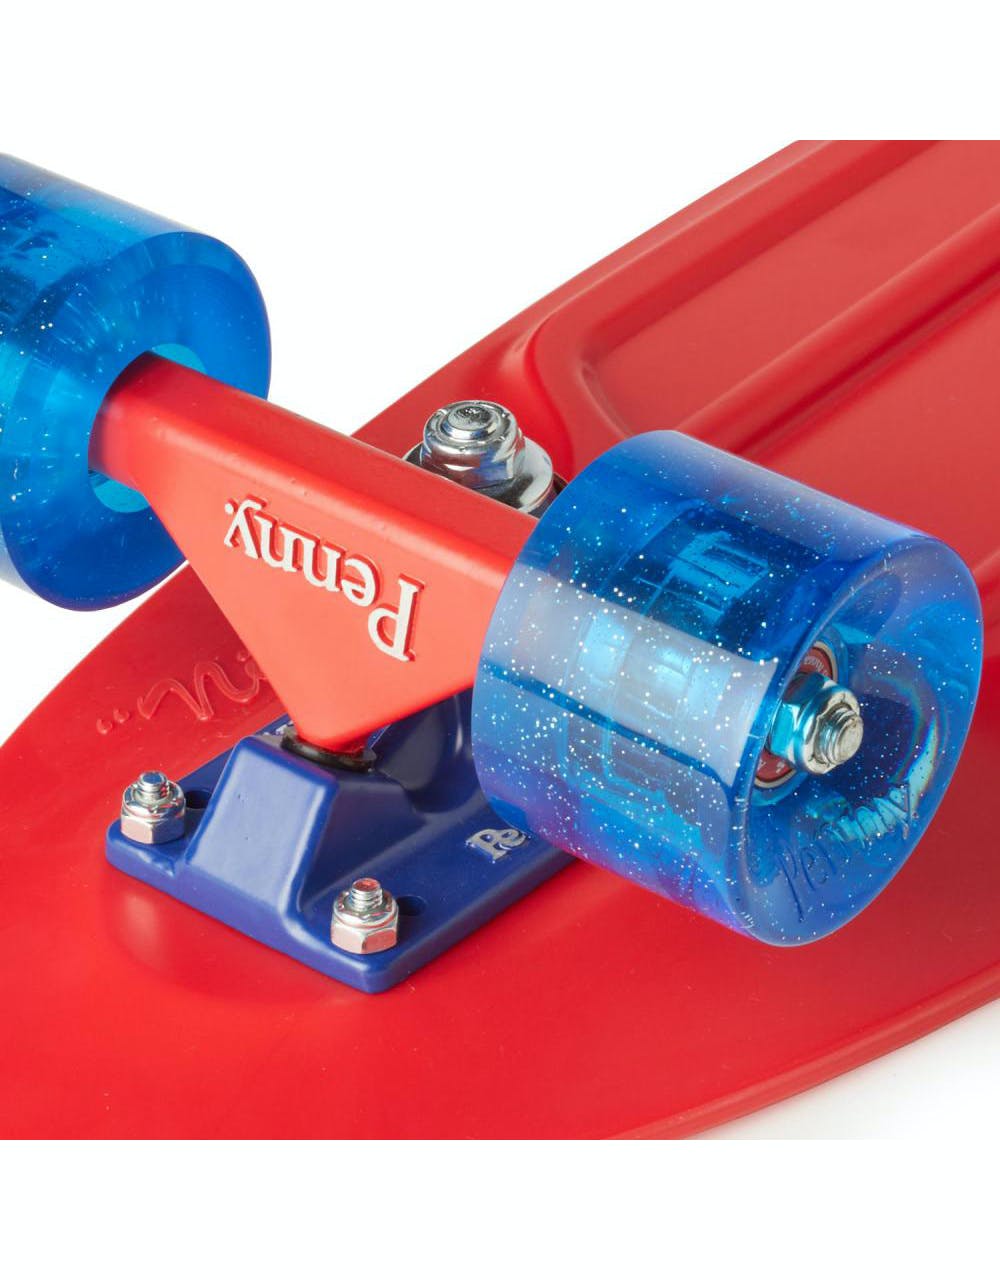 Penny Skateboards Classic Nickel Cruiser - 27" - Red Comet